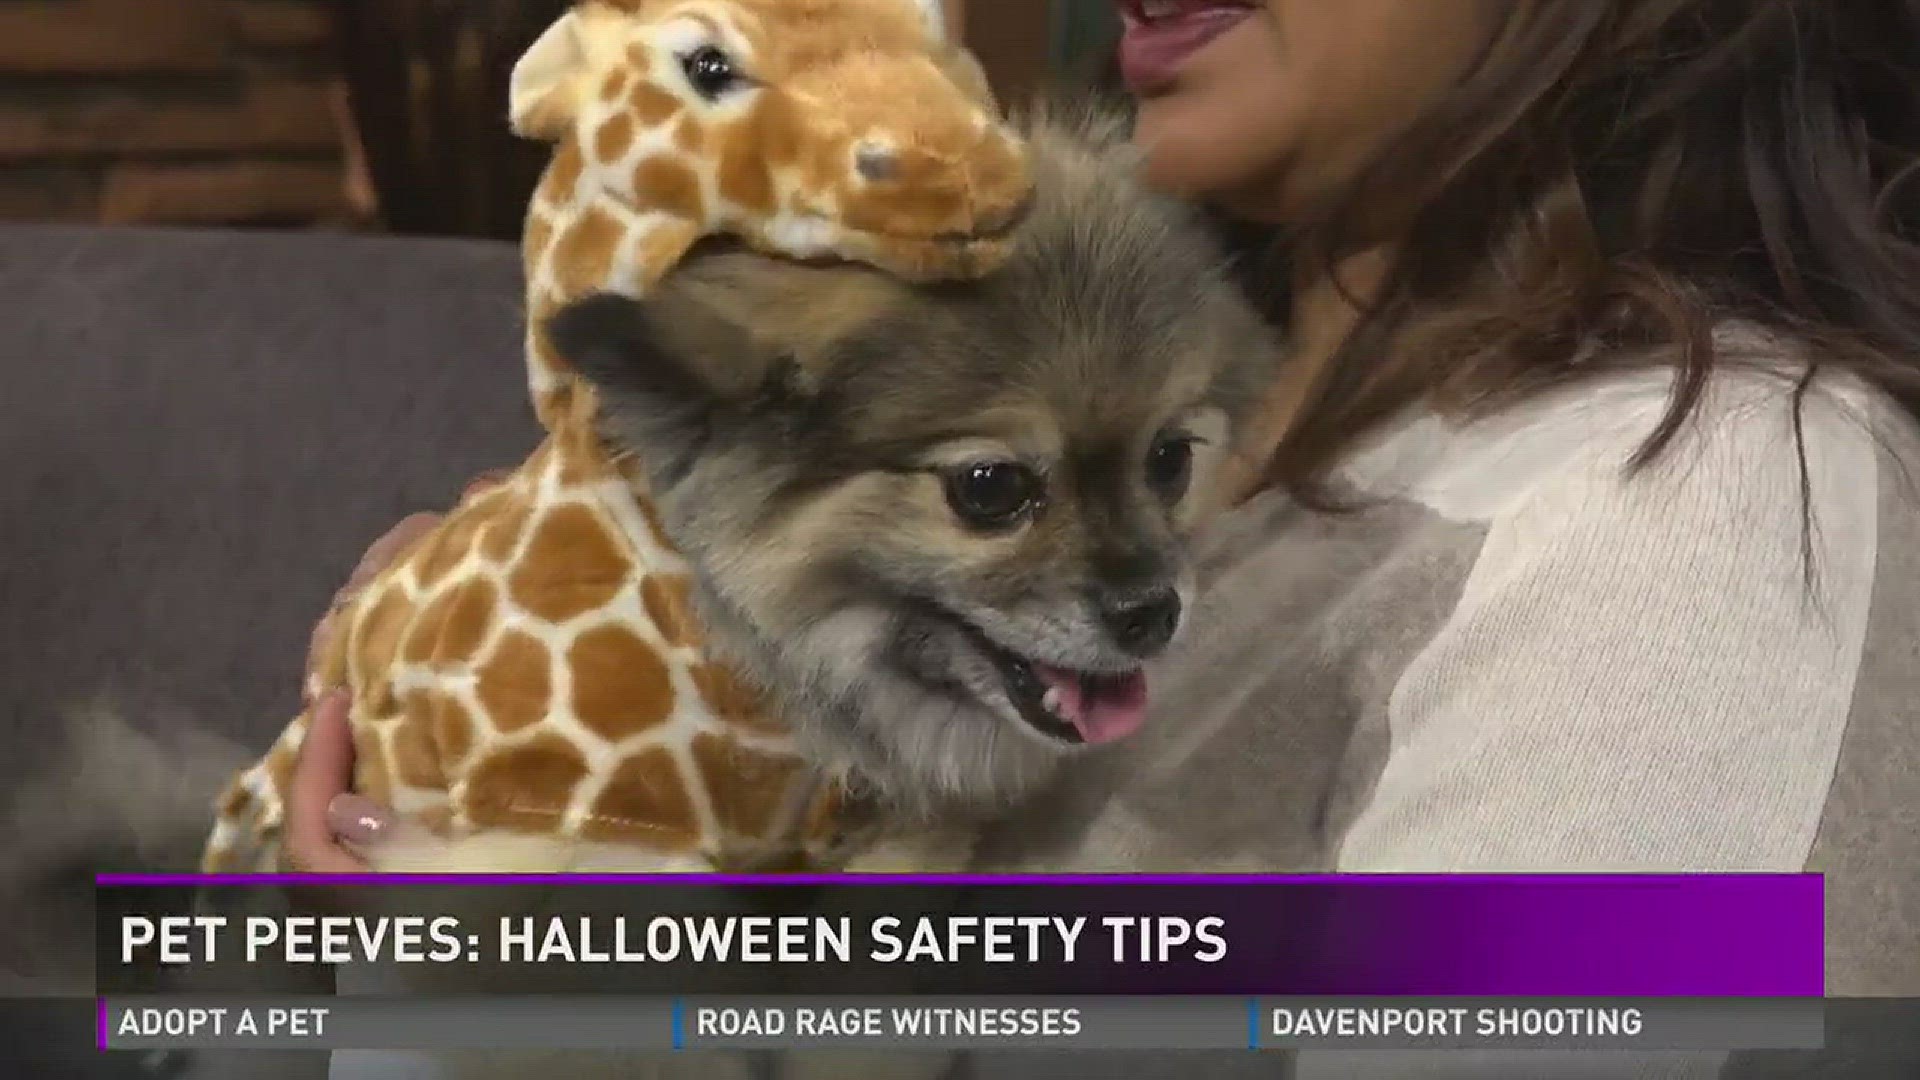 During the week of Halloween, the Pet Poison Helpline reports a 12 percent increase in calls, making it the call center's busiest time of year.